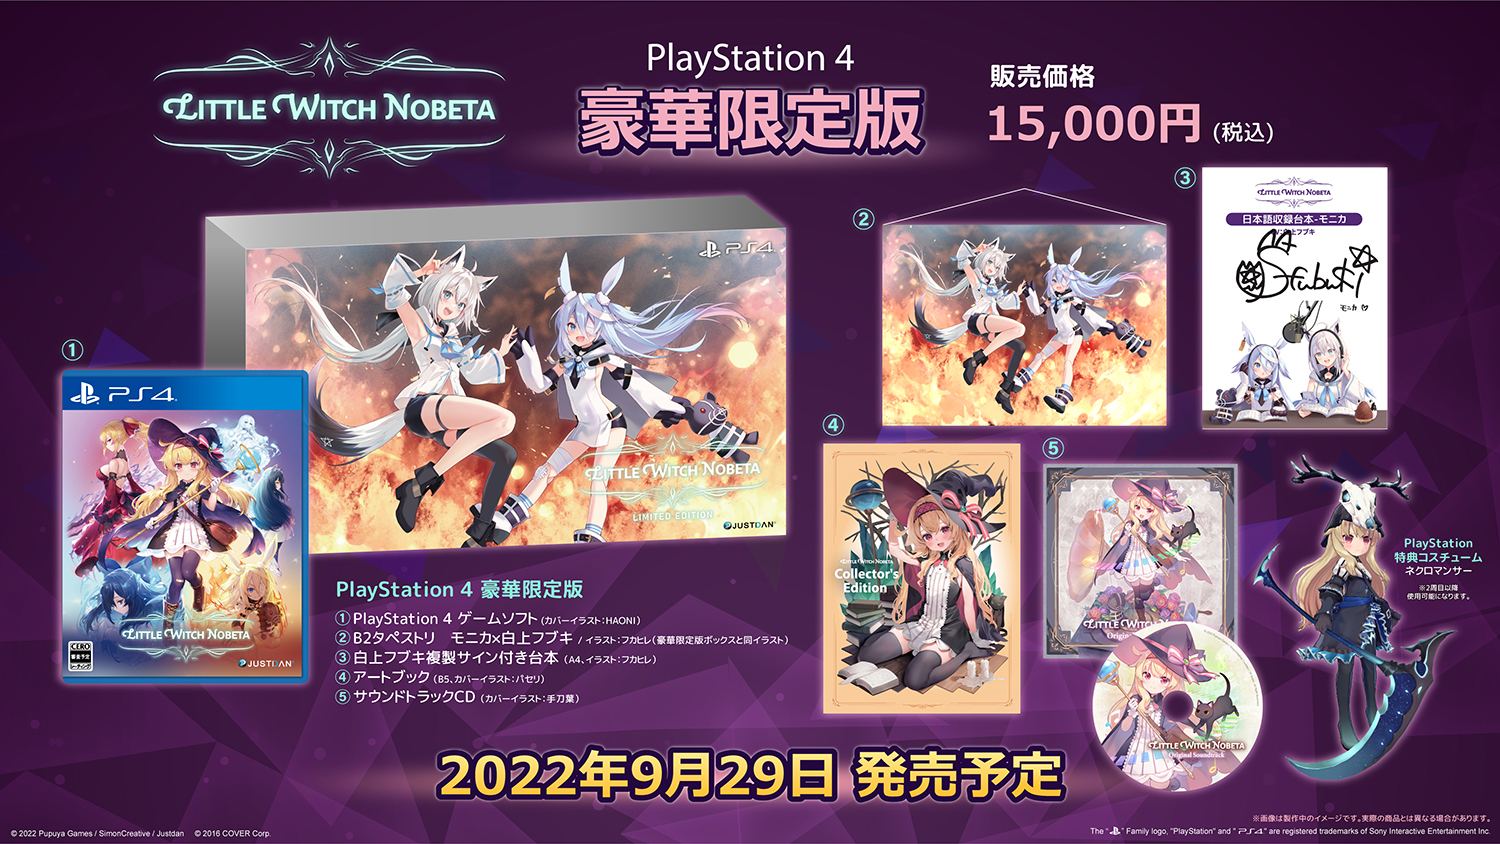 Little Witch Nobeta [Limited Edition] (English) for PlayStation 4